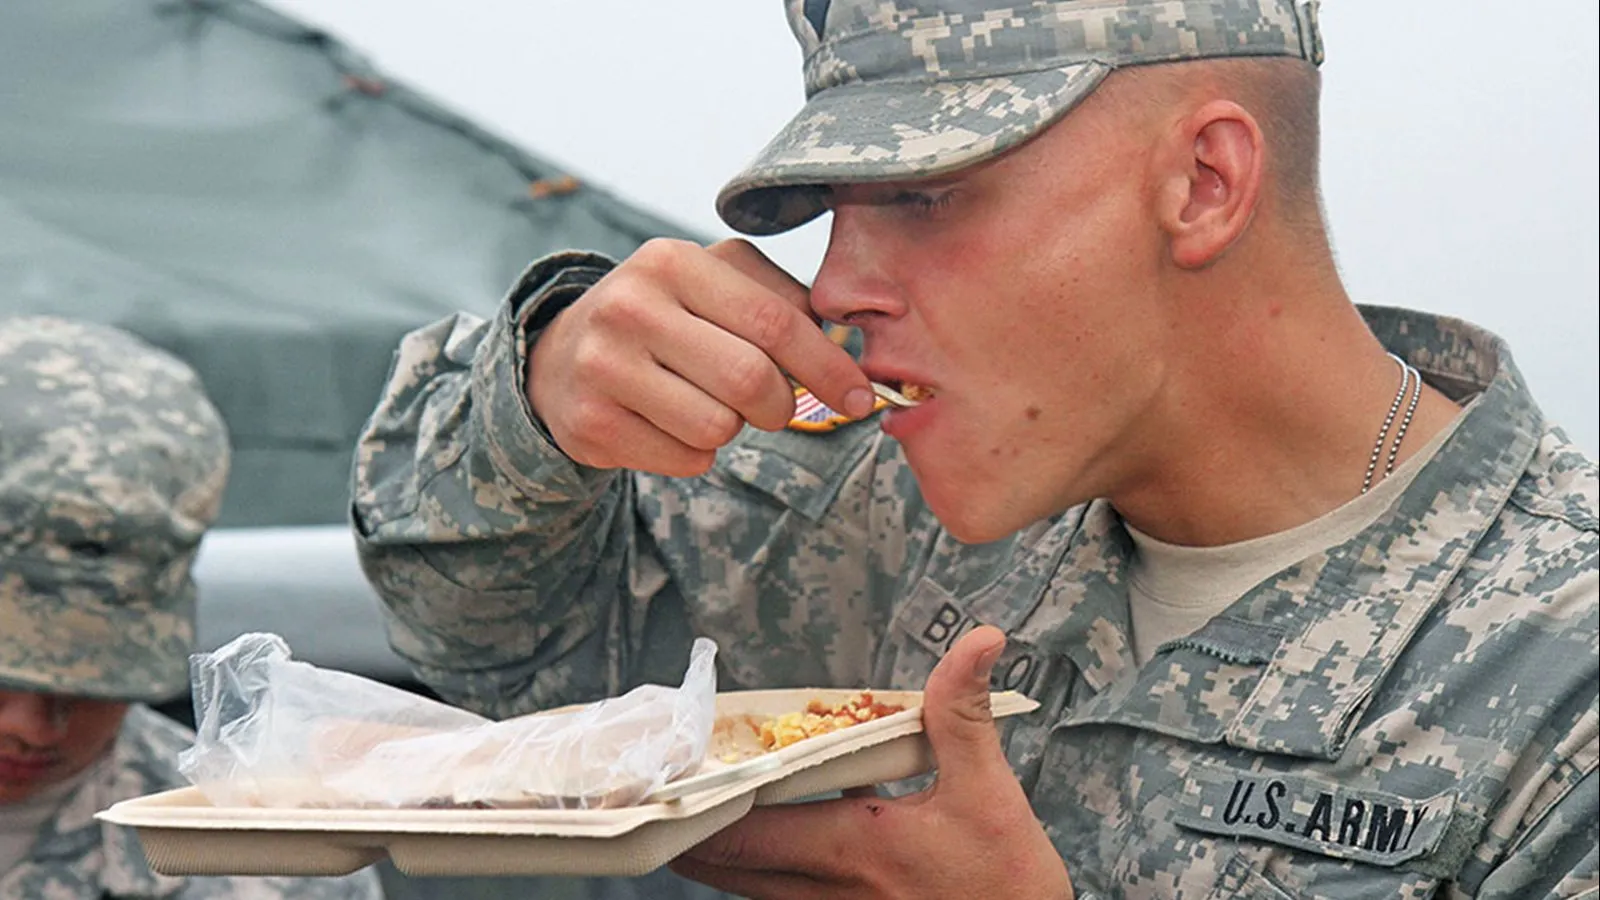 Pentagon Wants To Feed US Soldiers ‘Experimental’ Lab-Grown Meat